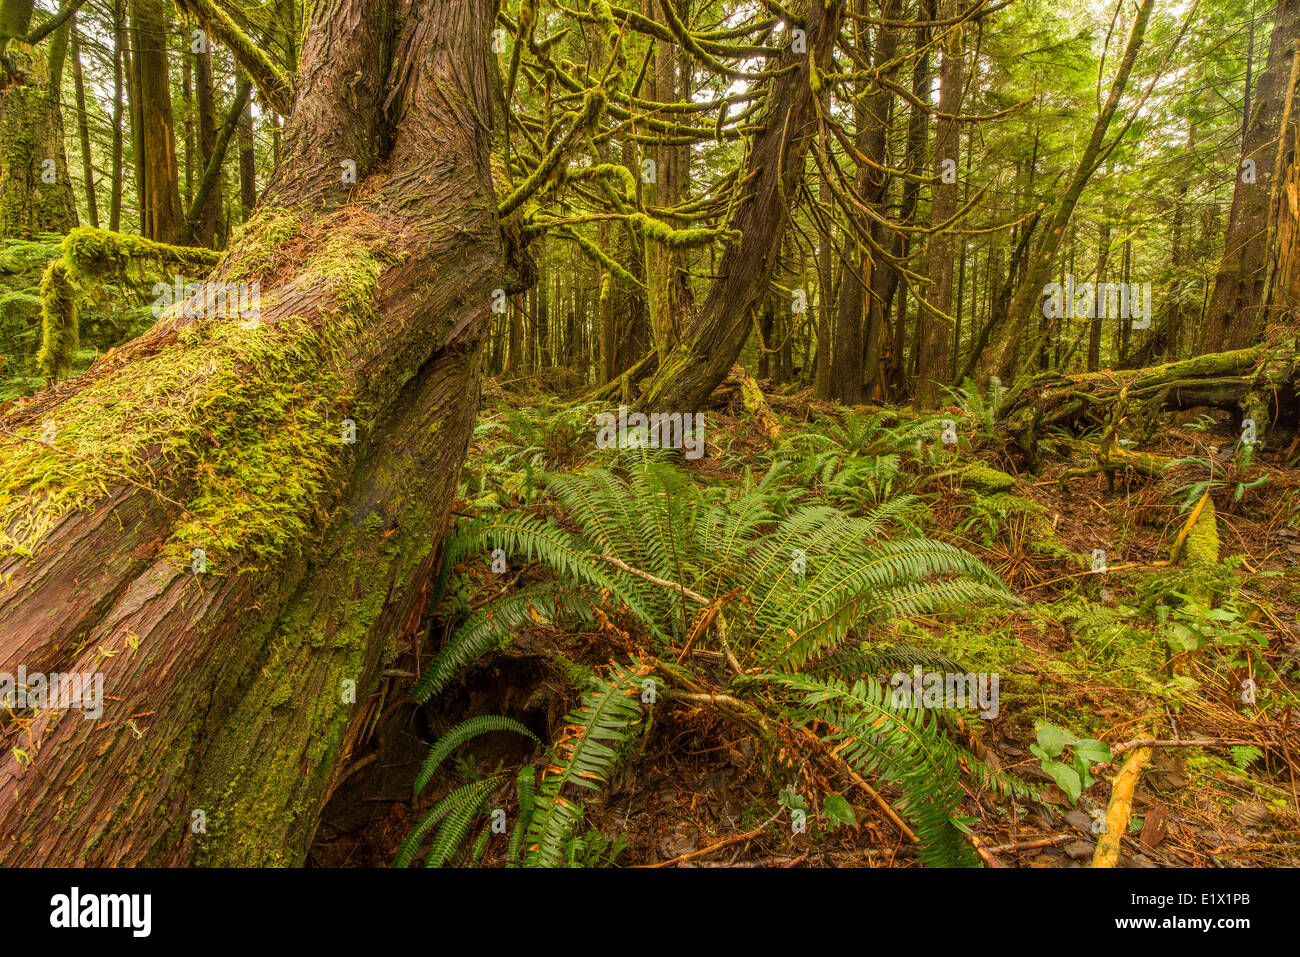 Cedar trees and foliage in Pacific Rim National Park, Vancouver Island, British Columbia, Canada. Stock Photo